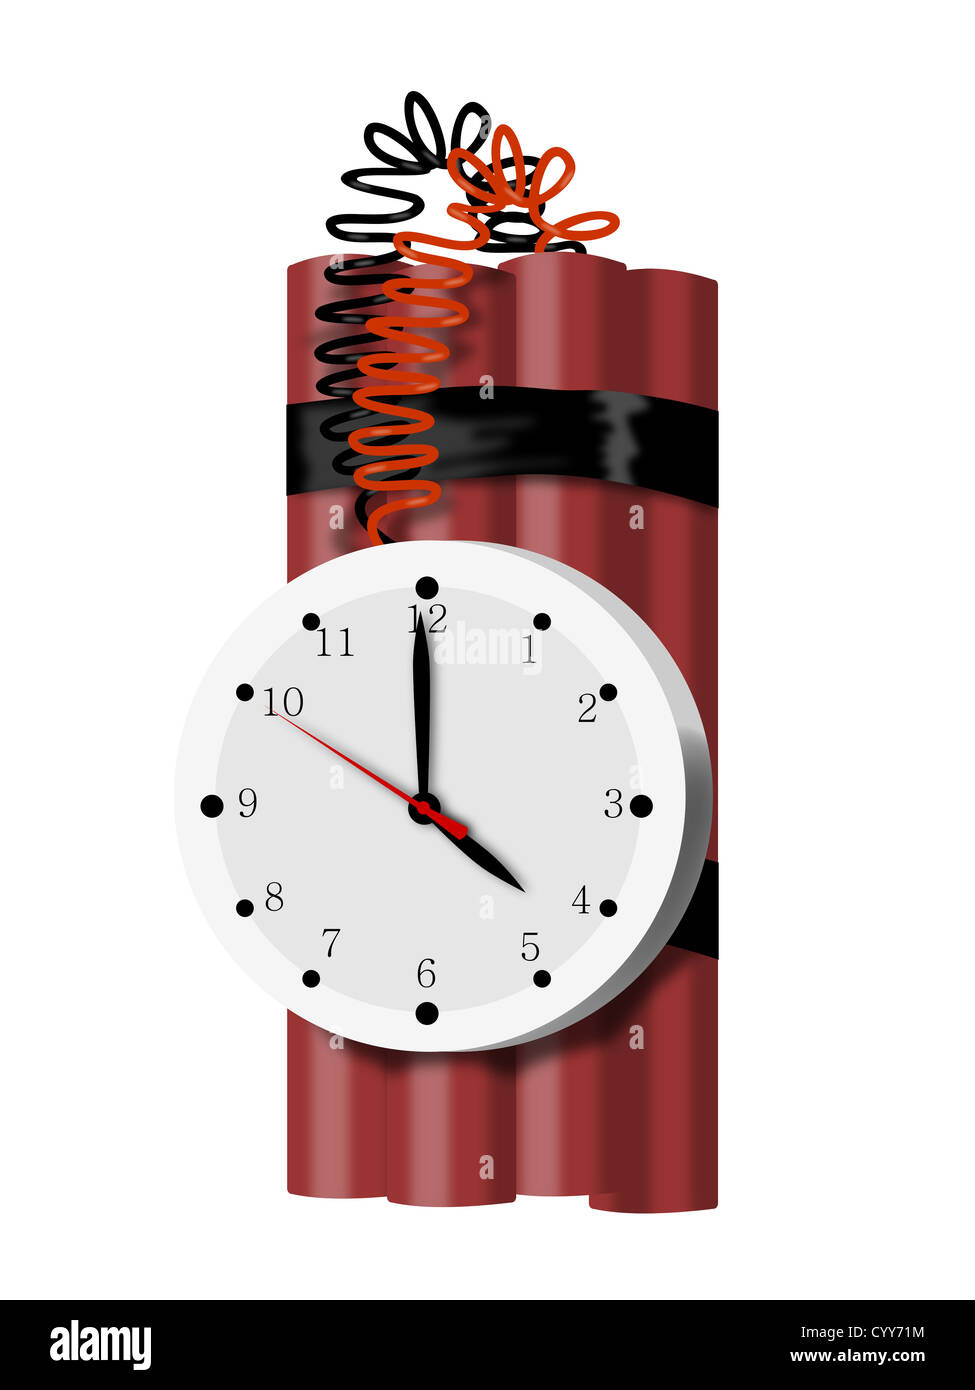 Illustration of a dynamite tnt time bomb with timer clock on isolated background Stock Photo